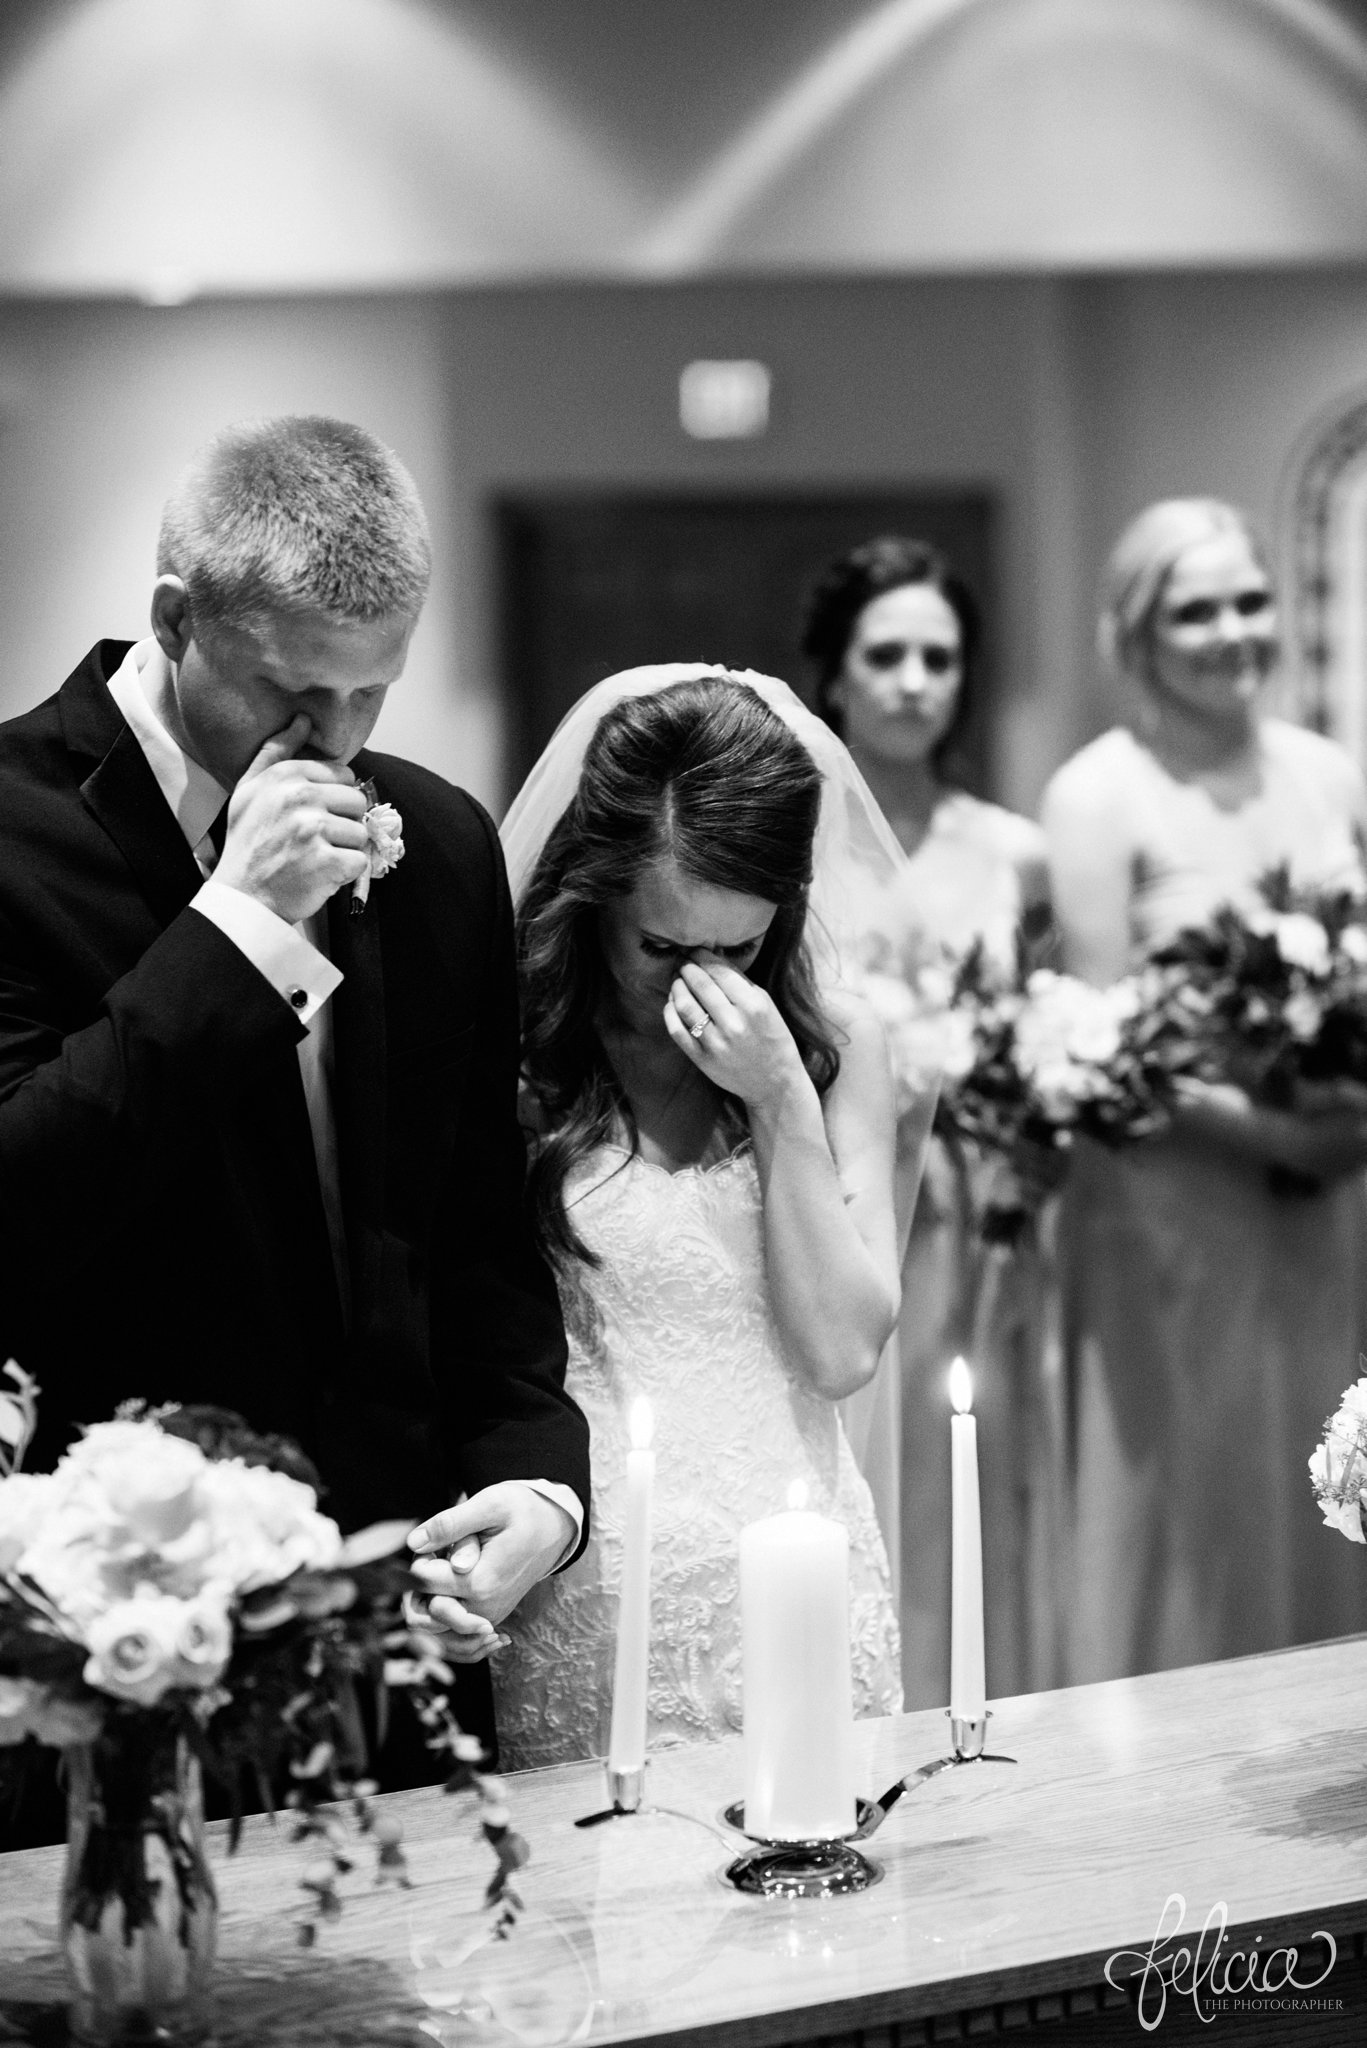 black and white | wedding | wedding photos | industrial | Rumely Event Space | wedding photography | images by feliciathephotographer.com | West Bottoms | wedding ceremony | The Providence Baptist Church | emotions | bride and groom at altar 